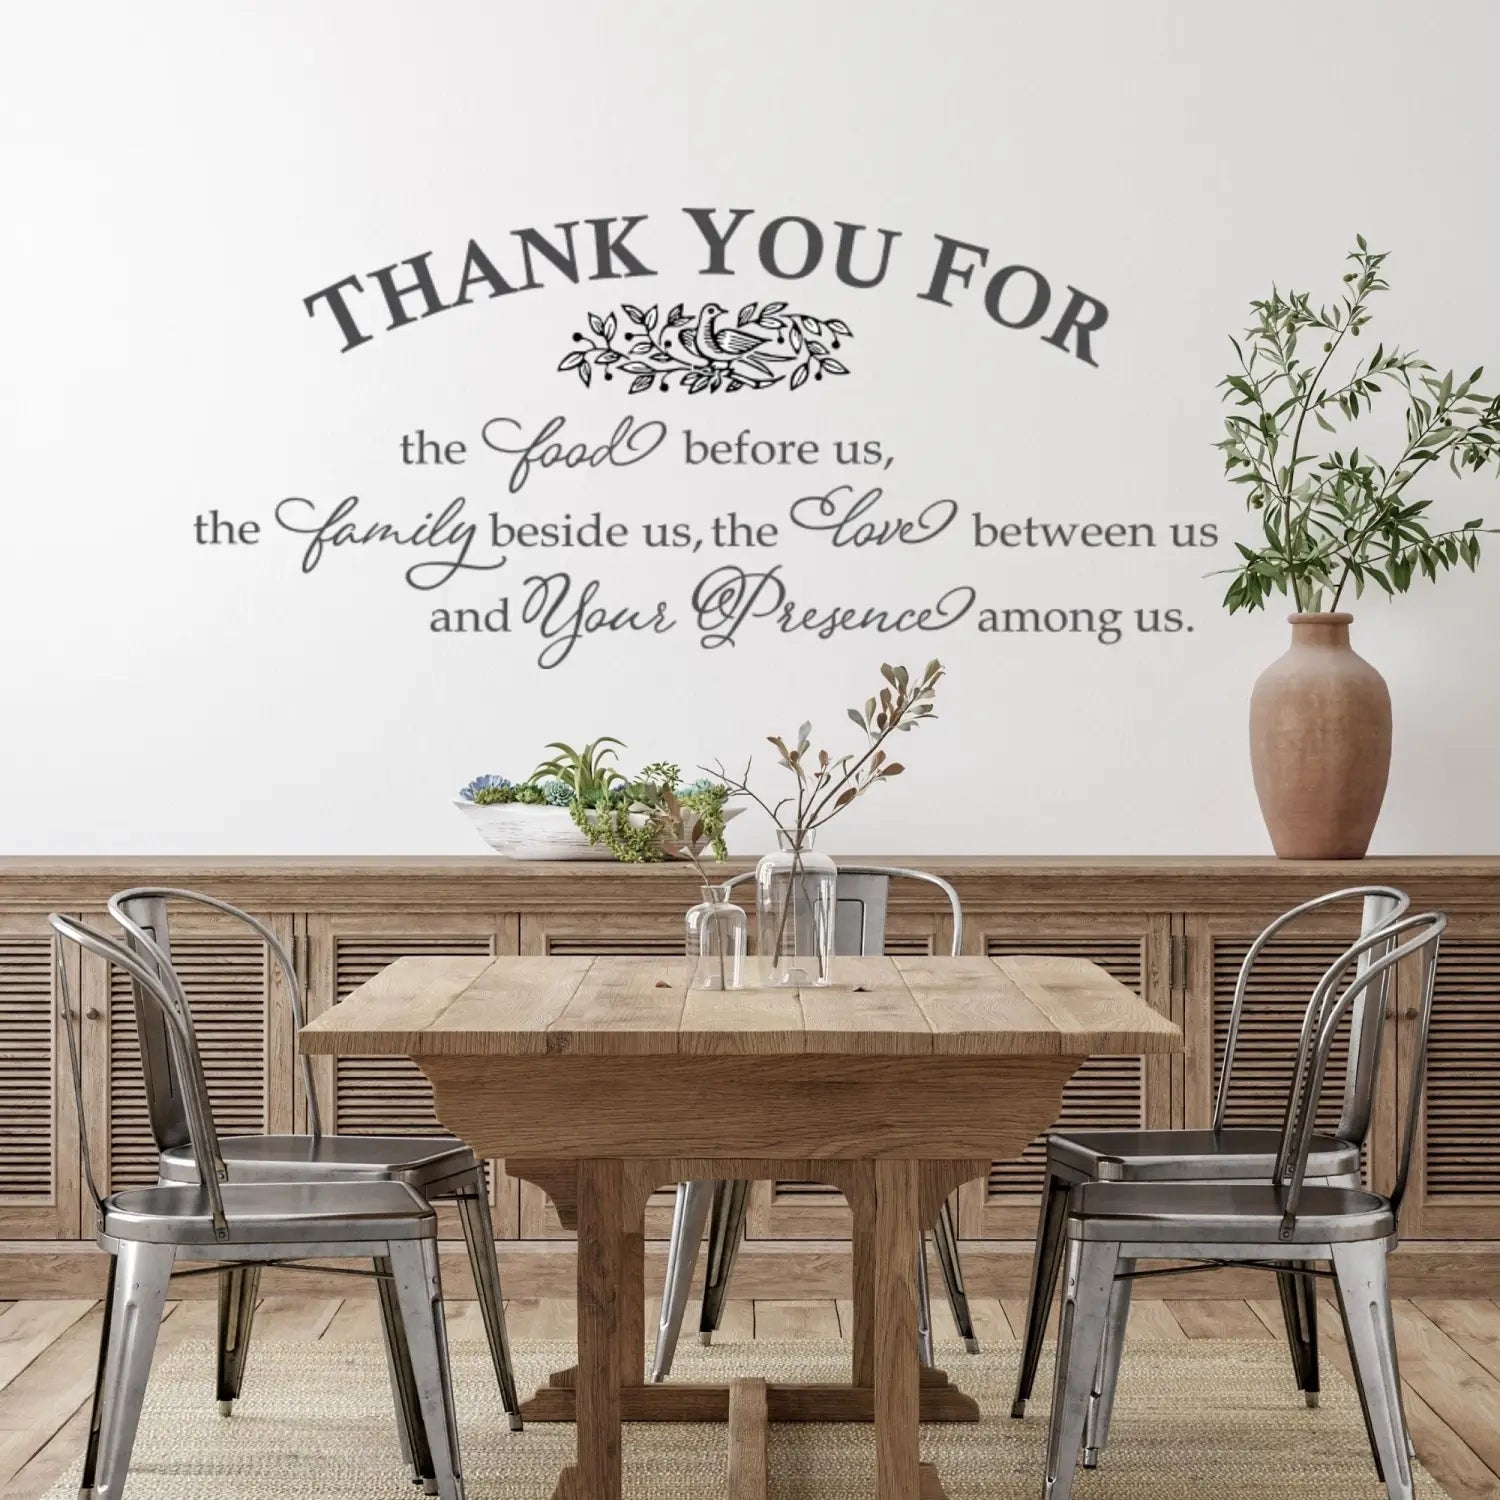 Rustic farmhouse dining room with Thanksgiving wall decal: "Thank you for the food before us, the family beside us, the love between us and Your Presence among us" - By TheSimpleStencil.com